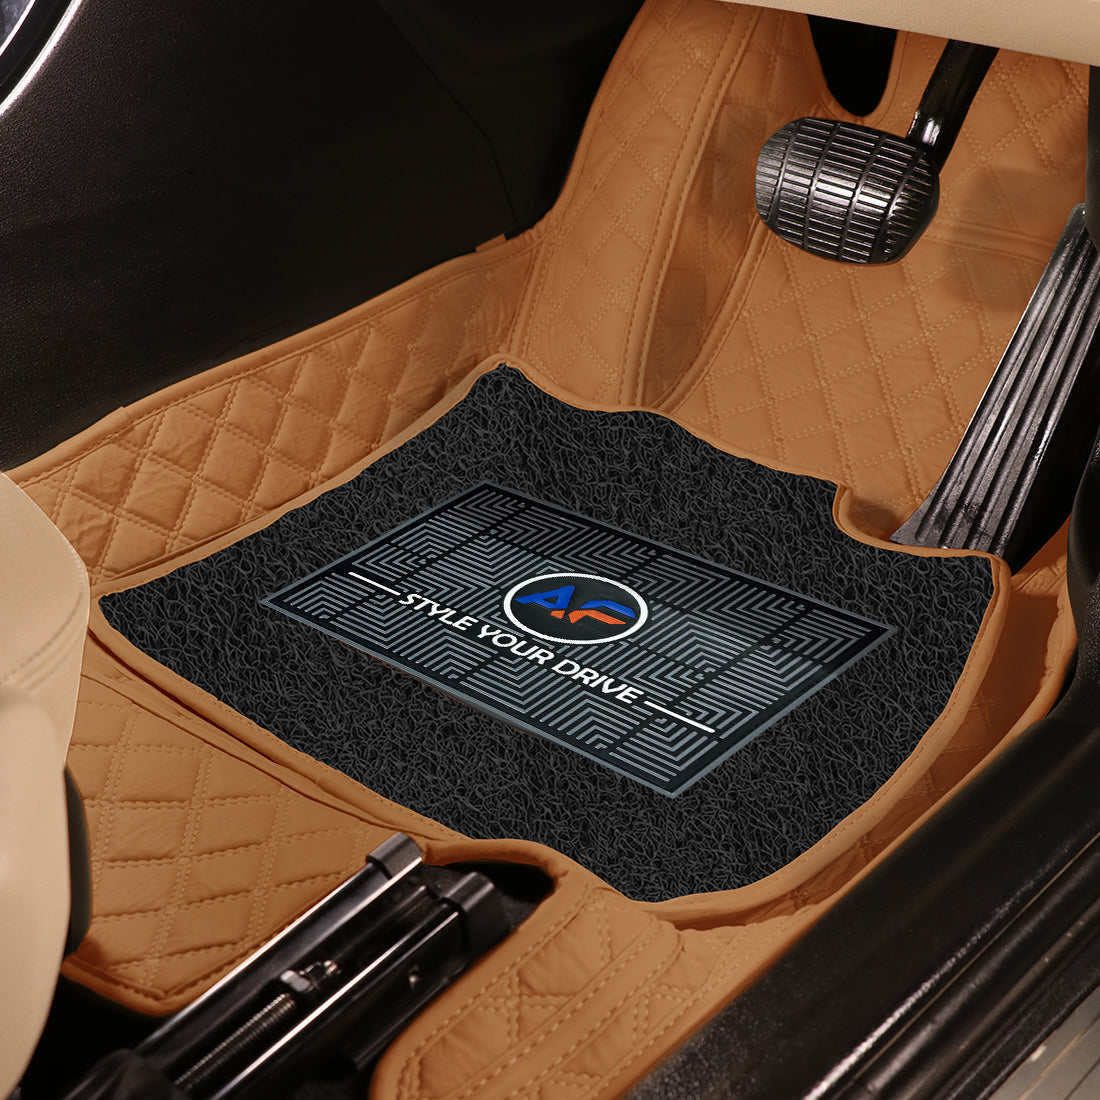 BMW iX xDrive 40 2023-7D Luxury Car Mat, All Weather Proof, Anti-Skid, 100% Waterproof & Odorless with Unique Diamond Fish Design (24mm Luxury PU Leather, 2 Rows)